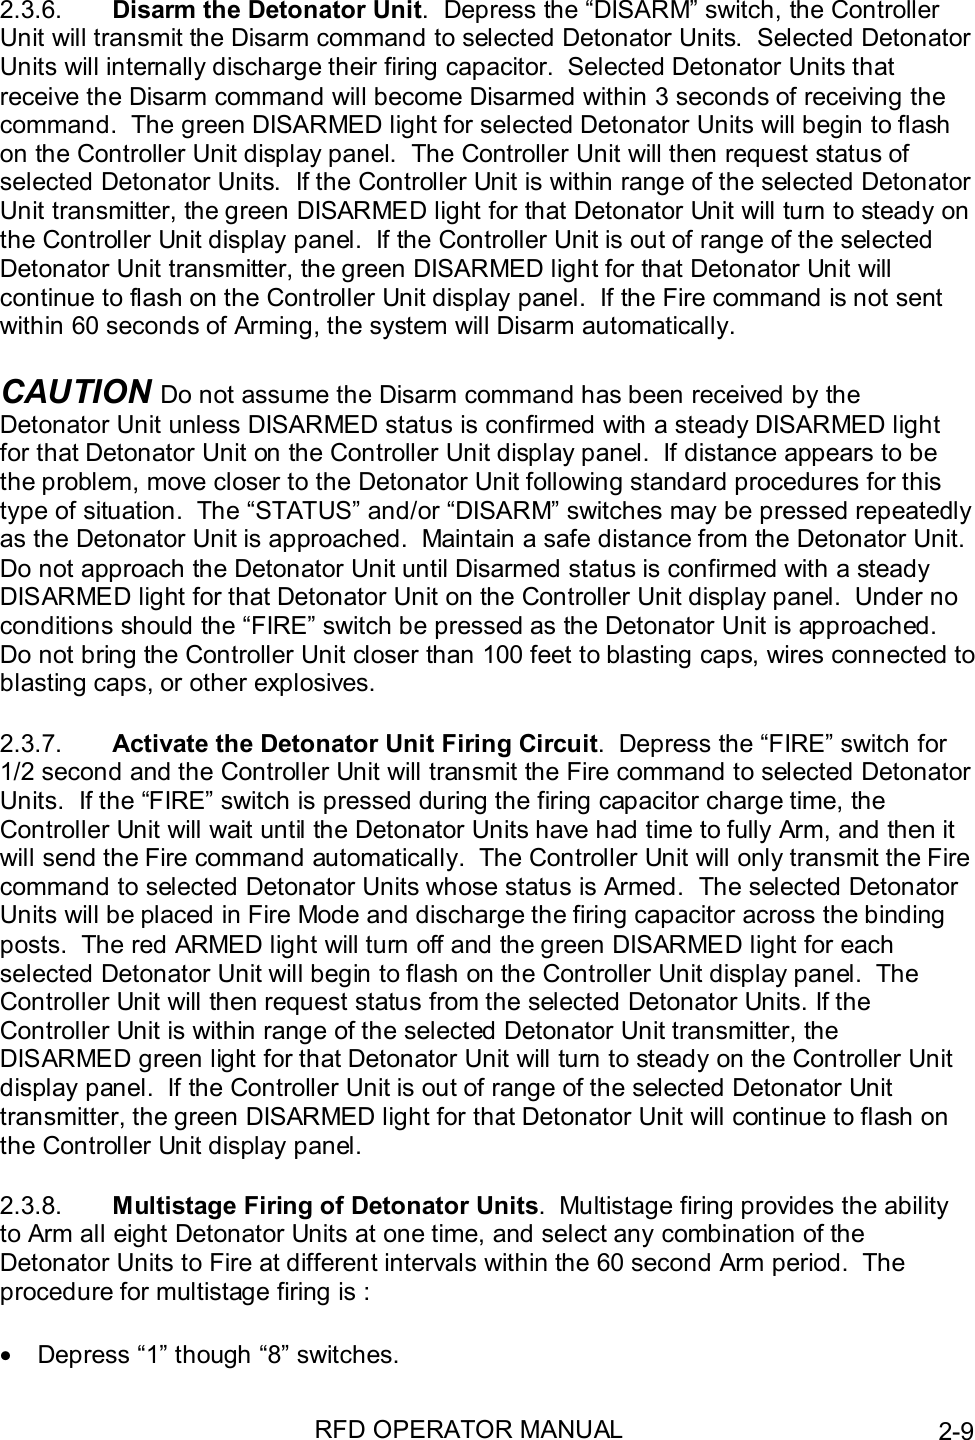 RFD OPERATOR MANUAL 2-92.3.6.  Disarm the Detonator Unit.  Depress the “DISARM” switch, the ControllerUnit will transmit the Disarm command to selected Detonator Units.  Selected DetonatorUnits will internally discharge their firing capacitor.  Selected Detonator Units thatreceive the Disarm command will become Disarmed within 3 seconds of receiving thecommand.  The green DISARMED light for selected Detonator Units will begin to flashon the Controller Unit display panel.  The Controller Unit will then request status ofselected Detonator Units.  If the Controller Unit is within range of the selected DetonatorUnit transmitter, the green DISARMED light for that Detonator Unit will turn to steady onthe Controller Unit display panel.  If the Controller Unit is out of range of the selectedDetonator Unit transmitter, the green DISARMED light for that Detonator Unit willcontinue to flash on the Controller Unit display panel.  If the Fire command is not sentwithin 60 seconds of Arming, the system will Disarm automatically.CAUTION Do not assume the Disarm command has been received by theDetonator Unit unless DISARMED status is confirmed with a steady DISARMED lightfor that Detonator Unit on the Controller Unit display panel.  If distance appears to bethe problem, move closer to the Detonator Unit following standard procedures for thistype of situation.  The “STATUS” and/or “DISARM” switches may be pressed repeatedlyas the Detonator Unit is approached.  Maintain a safe distance from the Detonator Unit.Do not approach the Detonator Unit until Disarmed status is confirmed with a steadyDISARMED light for that Detonator Unit on the Controller Unit display panel.  Under noconditions should the “FIRE” switch be pressed as the Detonator Unit is approached.Do not bring the Controller Unit closer than 100 feet to blasting caps, wires connected toblasting caps, or other explosives.2.3.7.  Activate the Detonator Unit Firing Circuit.  Depress the “FIRE” switch for1/2 second and the Controller Unit will transmit the Fire command to selected DetonatorUnits.  If the “FIRE” switch is pressed during the firing capacitor charge time, theController Unit will wait until the Detonator Units have had time to fully Arm, and then itwill send the Fire command automatically.  The Controller Unit will only transmit the Firecommand to selected Detonator Units whose status is Armed.  The selected DetonatorUnits will be placed in Fire Mode and discharge the firing capacitor across the bindingposts.  The red ARMED light will turn off and the green DISARMED light for eachselected Detonator Unit will begin to flash on the Controller Unit display panel.  TheController Unit will then request status from the selected Detonator Units. If theController Unit is within range of the selected Detonator Unit transmitter, theDISARMED green light for that Detonator Unit will turn to steady on the Controller Unitdisplay panel.  If the Controller Unit is out of range of the selected Detonator Unittransmitter, the green DISARMED light for that Detonator Unit will continue to flash onthe Controller Unit display panel.2.3.8.  Multistage Firing of Detonator Units.  Multistage firing provides the abilityto Arm all eight Detonator Units at one time, and select any combination of theDetonator Units to Fire at different intervals within the 60 second Arm period.  Theprocedure for multistage firing is :•  Depress “1” though “8” switches.